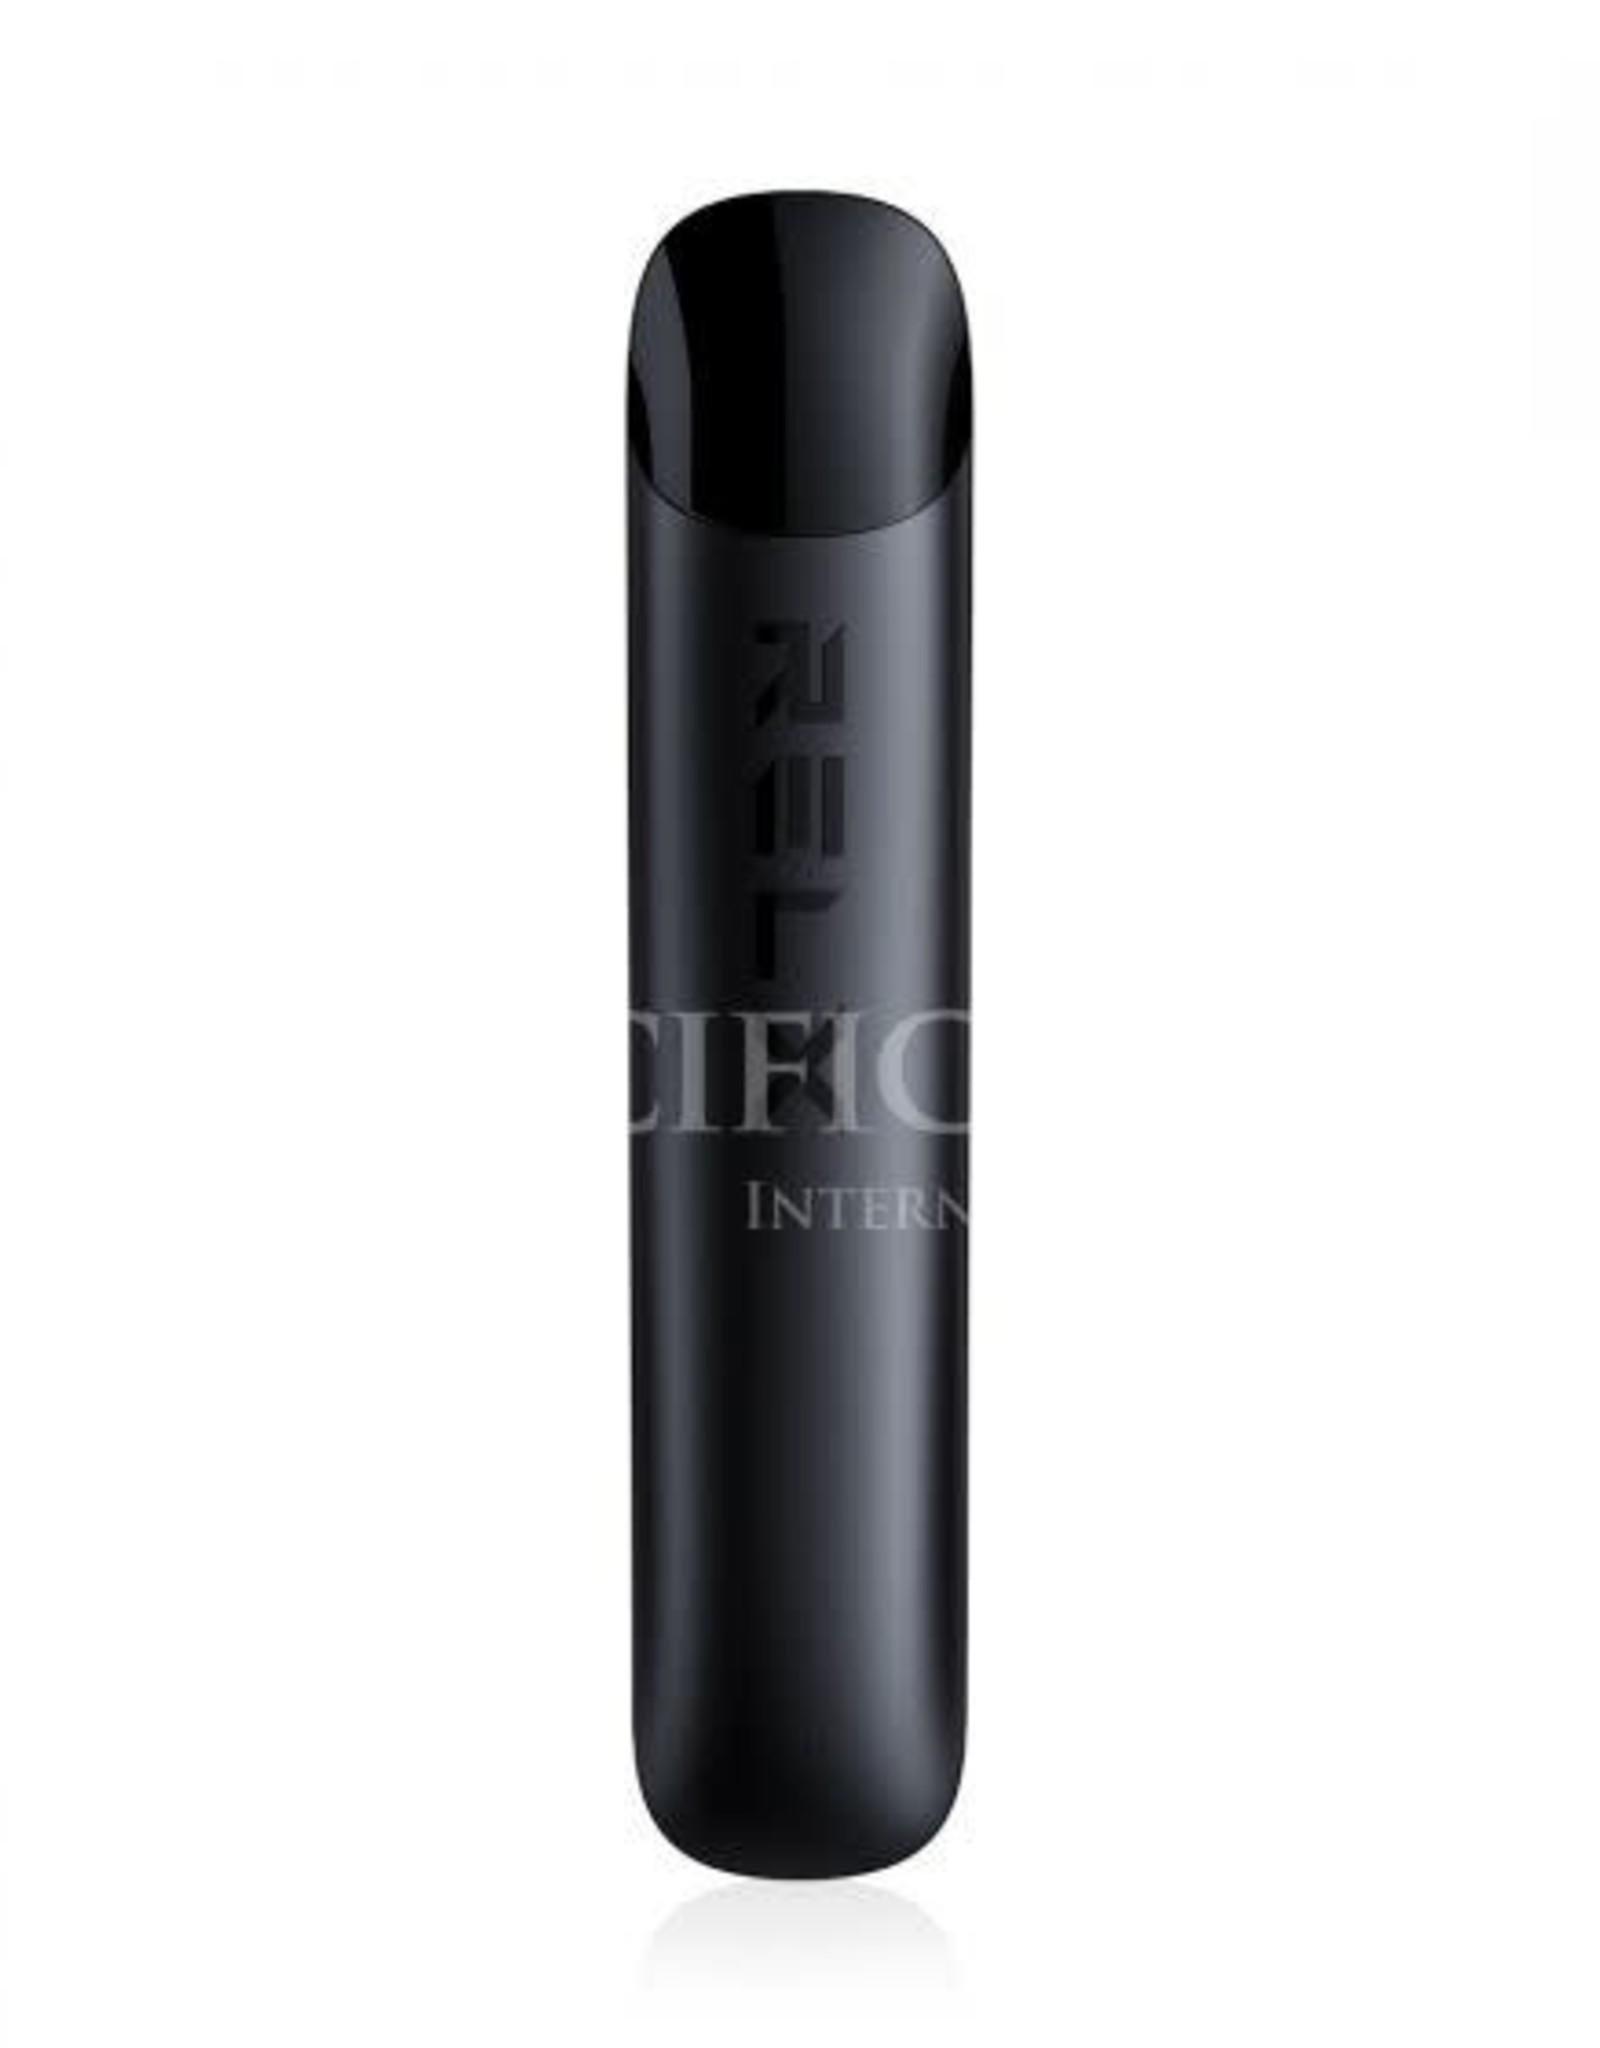 The Relx Nano is a disposable closed-pod system. 